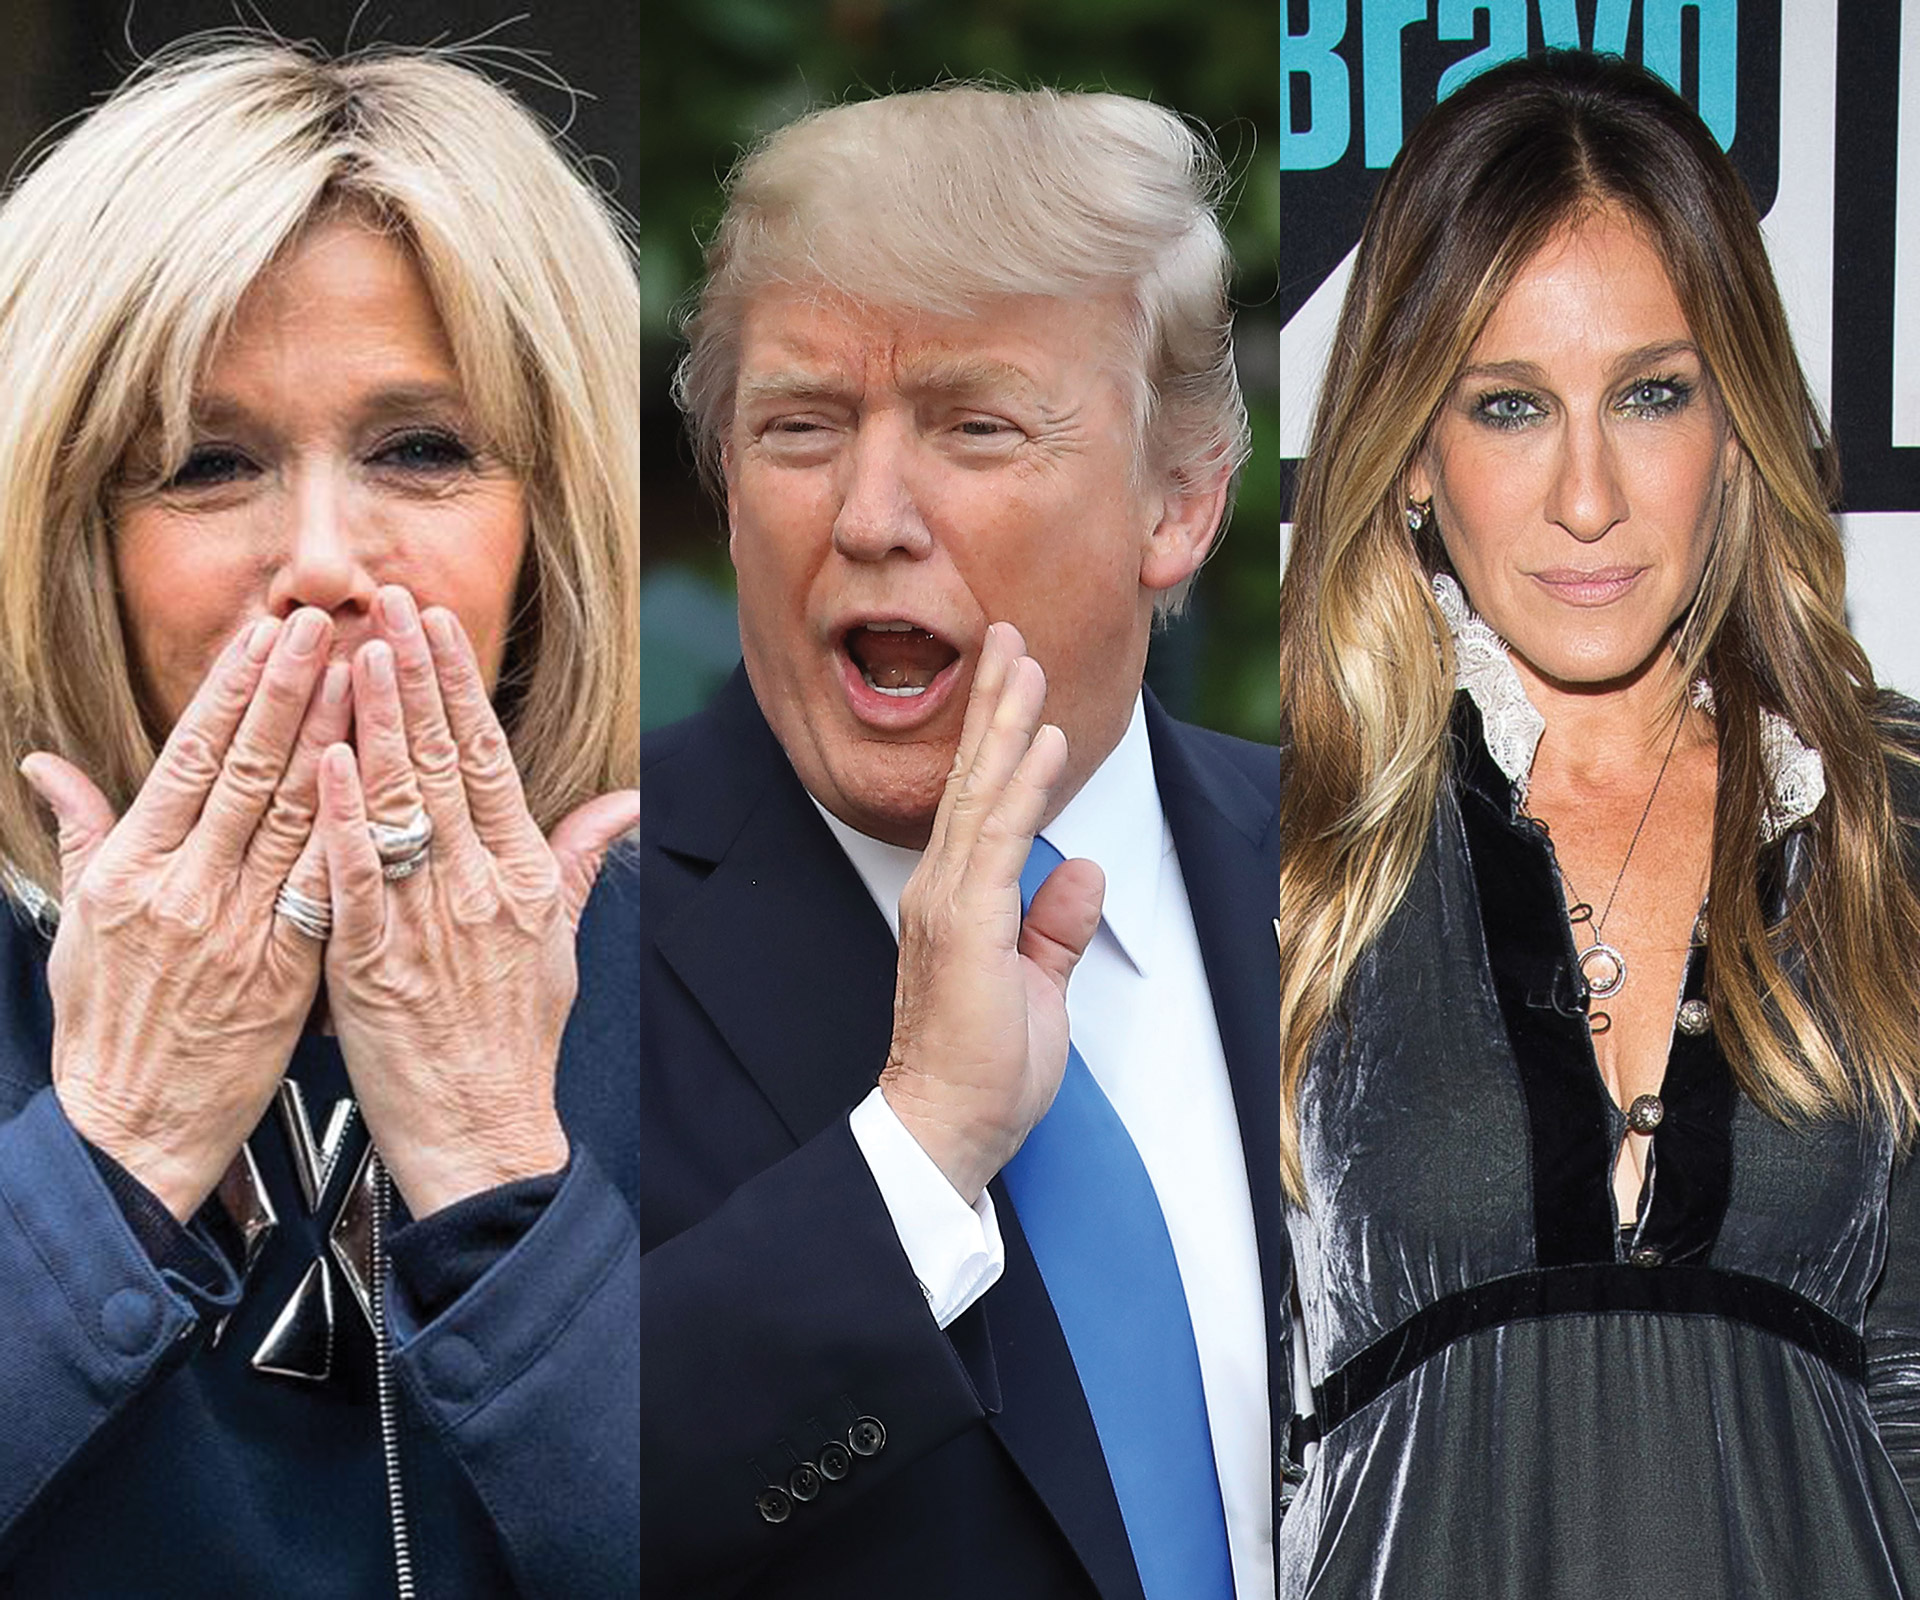 Horrific things Donald Trump has said about women